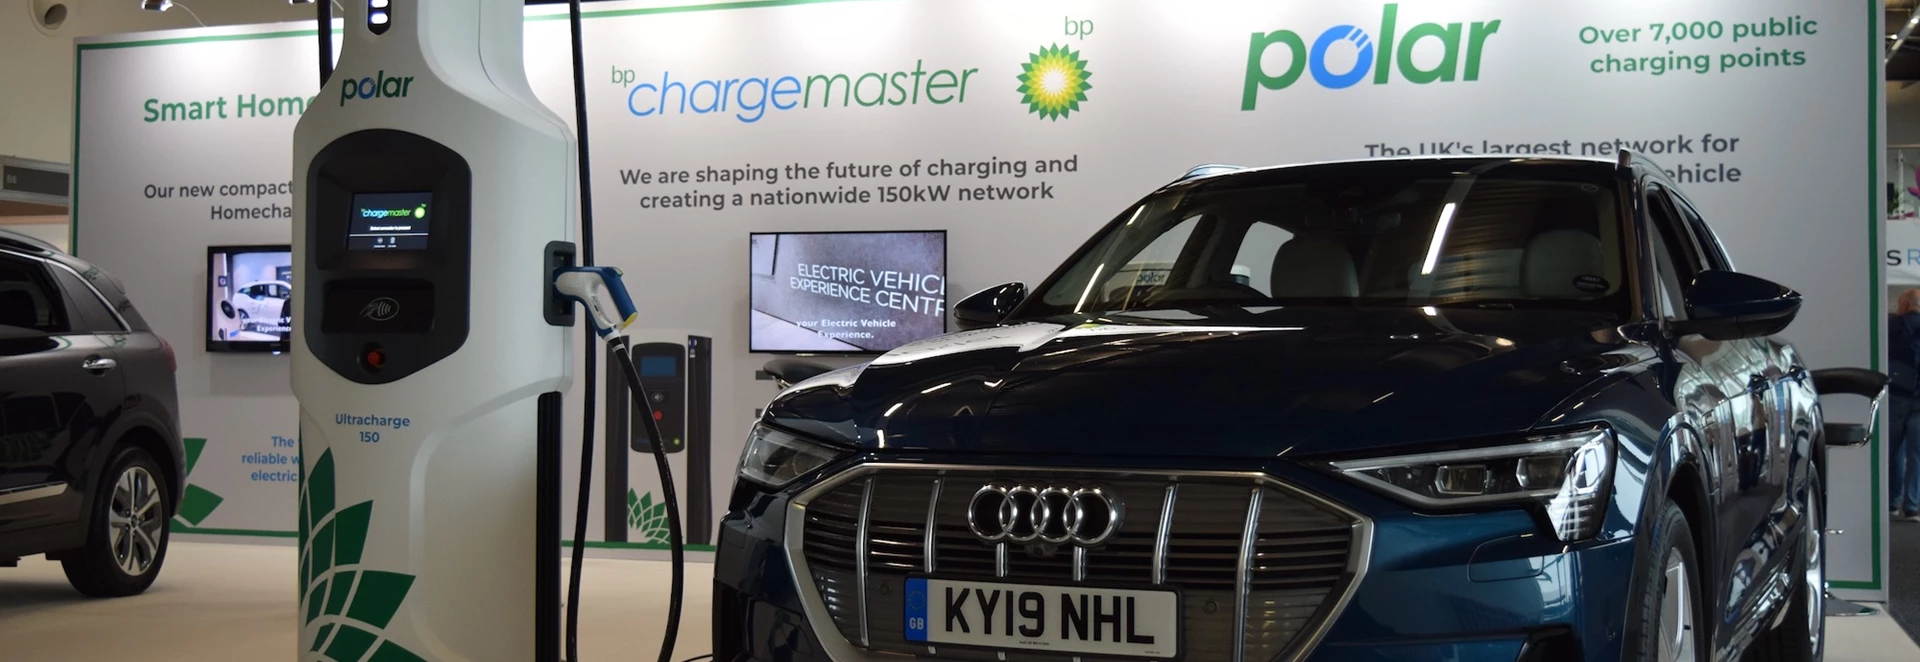 BP Chargemaster unveils 150kW ultra-fast EV charger 